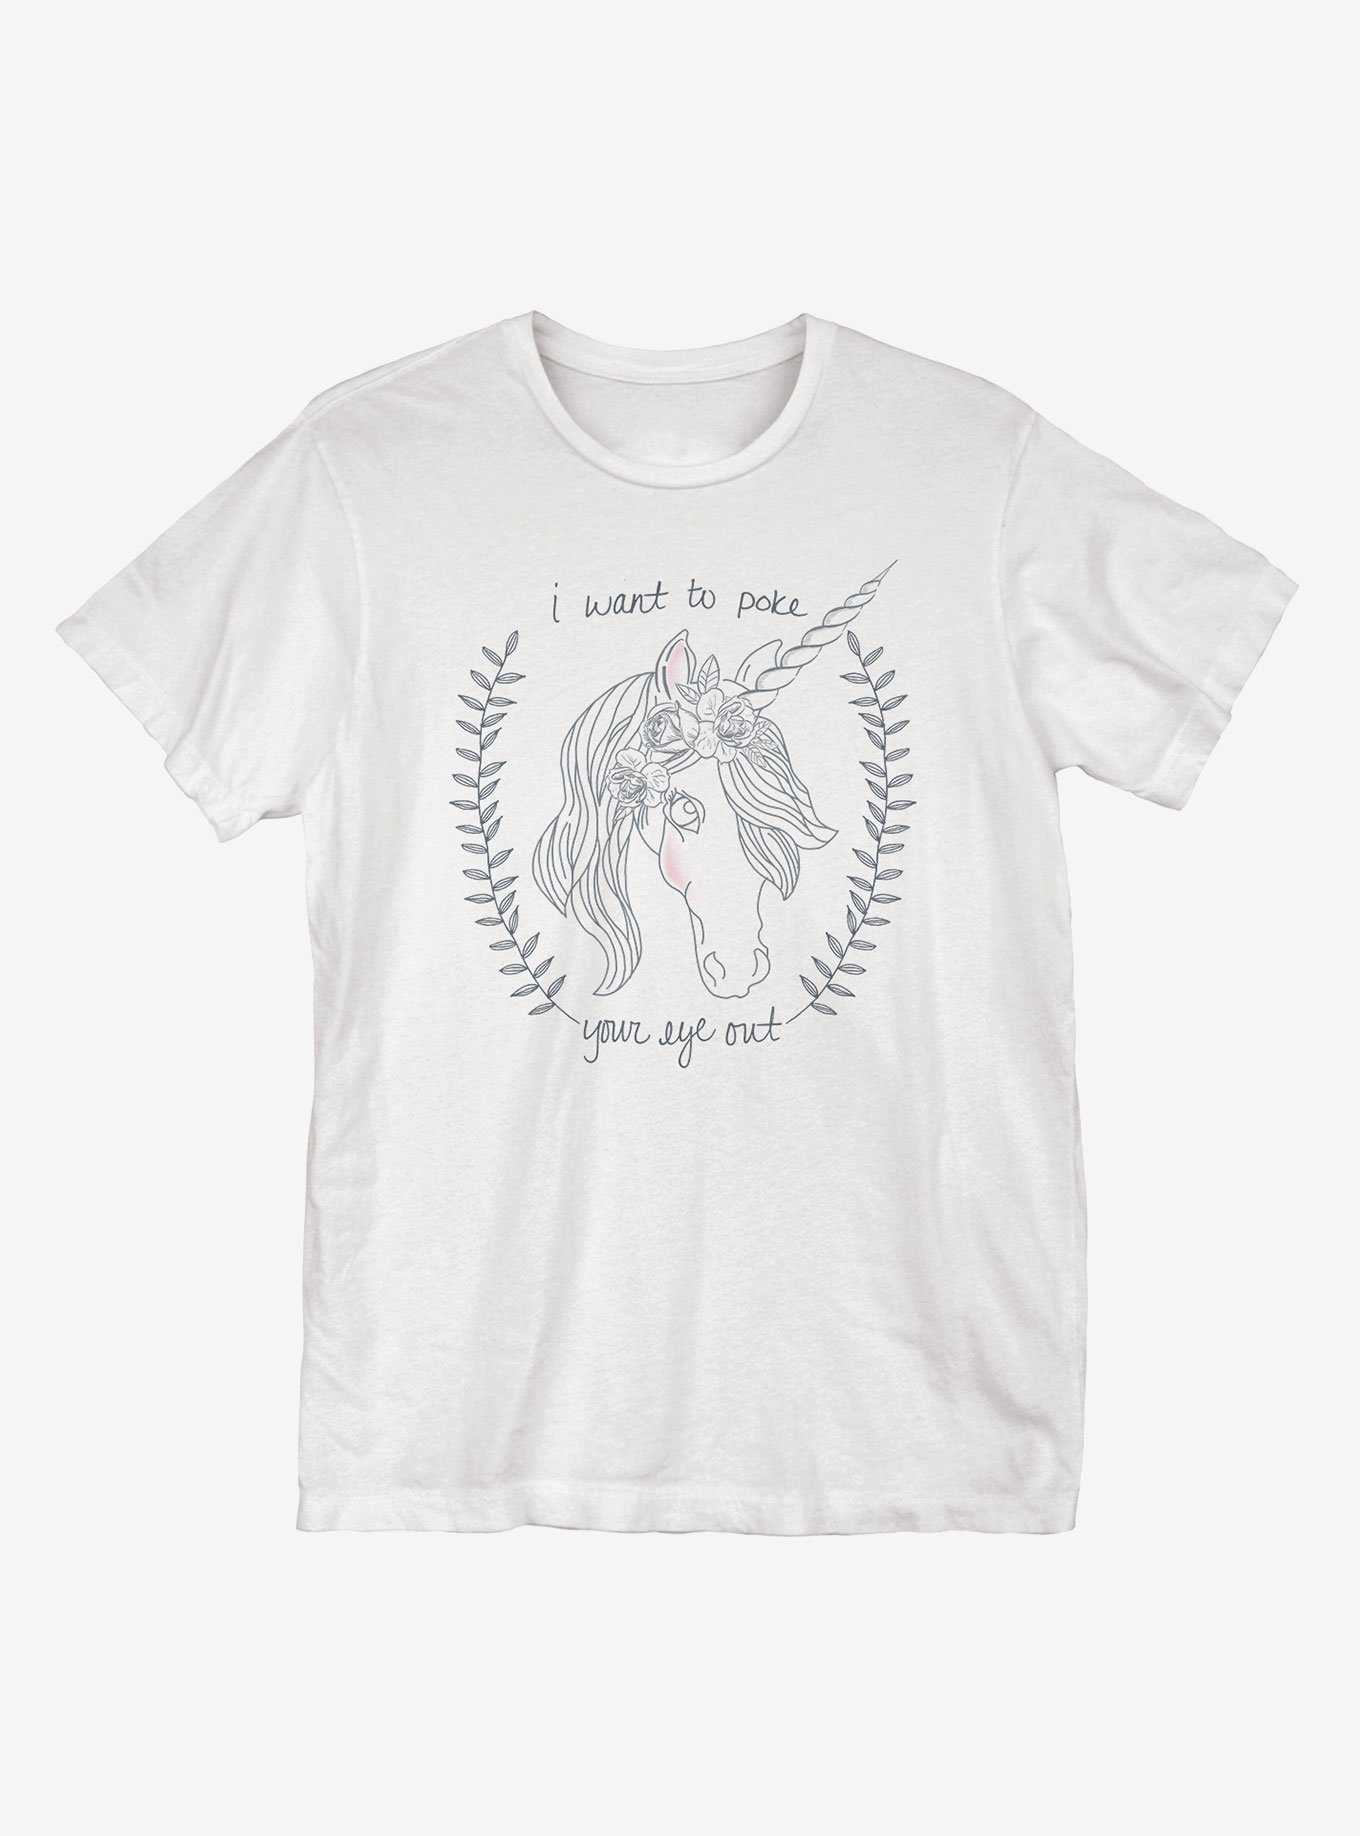 Your Eye Out T-Shirt, , hi-res